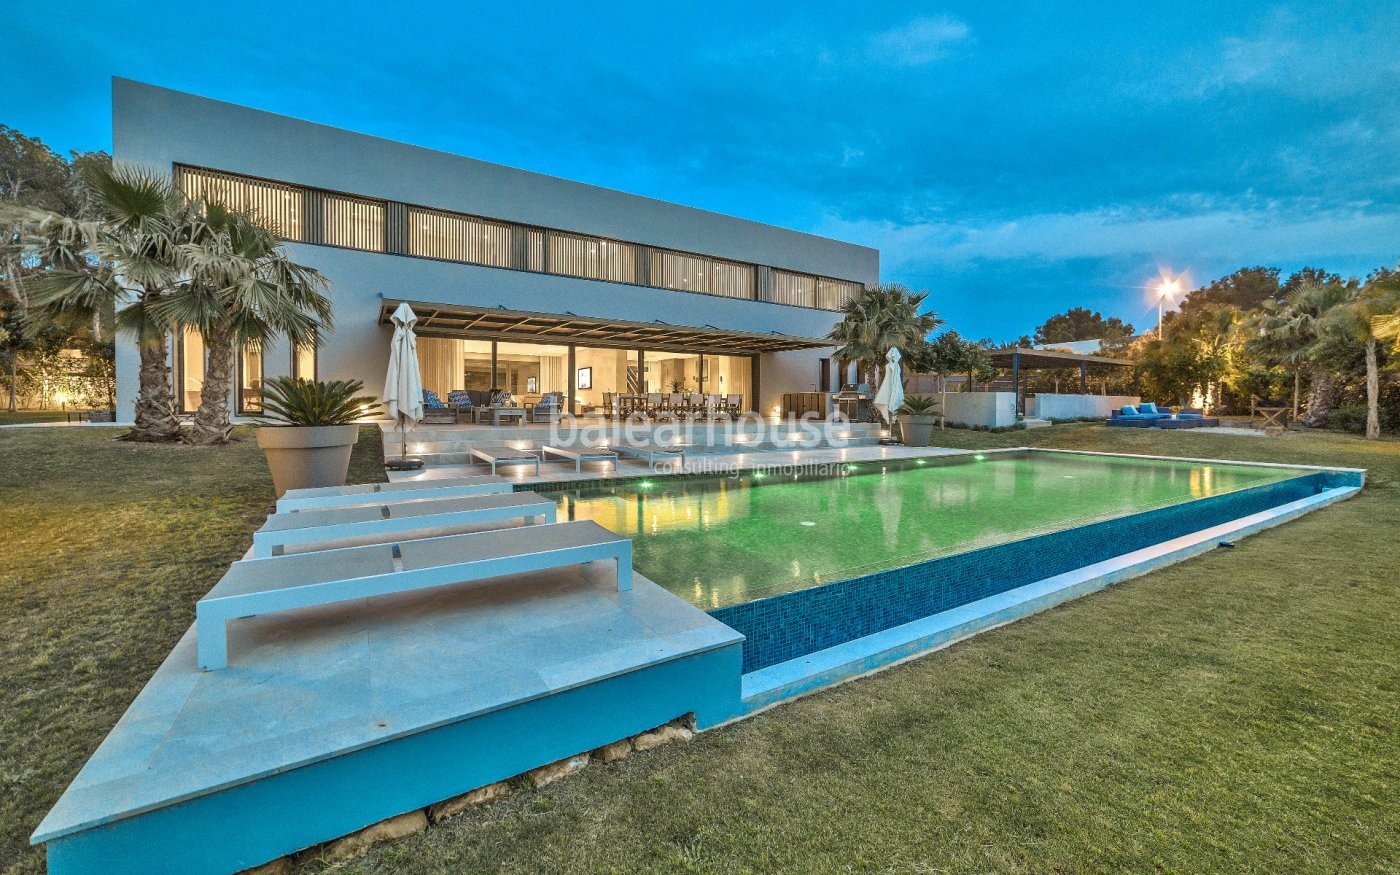 Large modern Villa with light open spaces in a tranquil setting with sea views